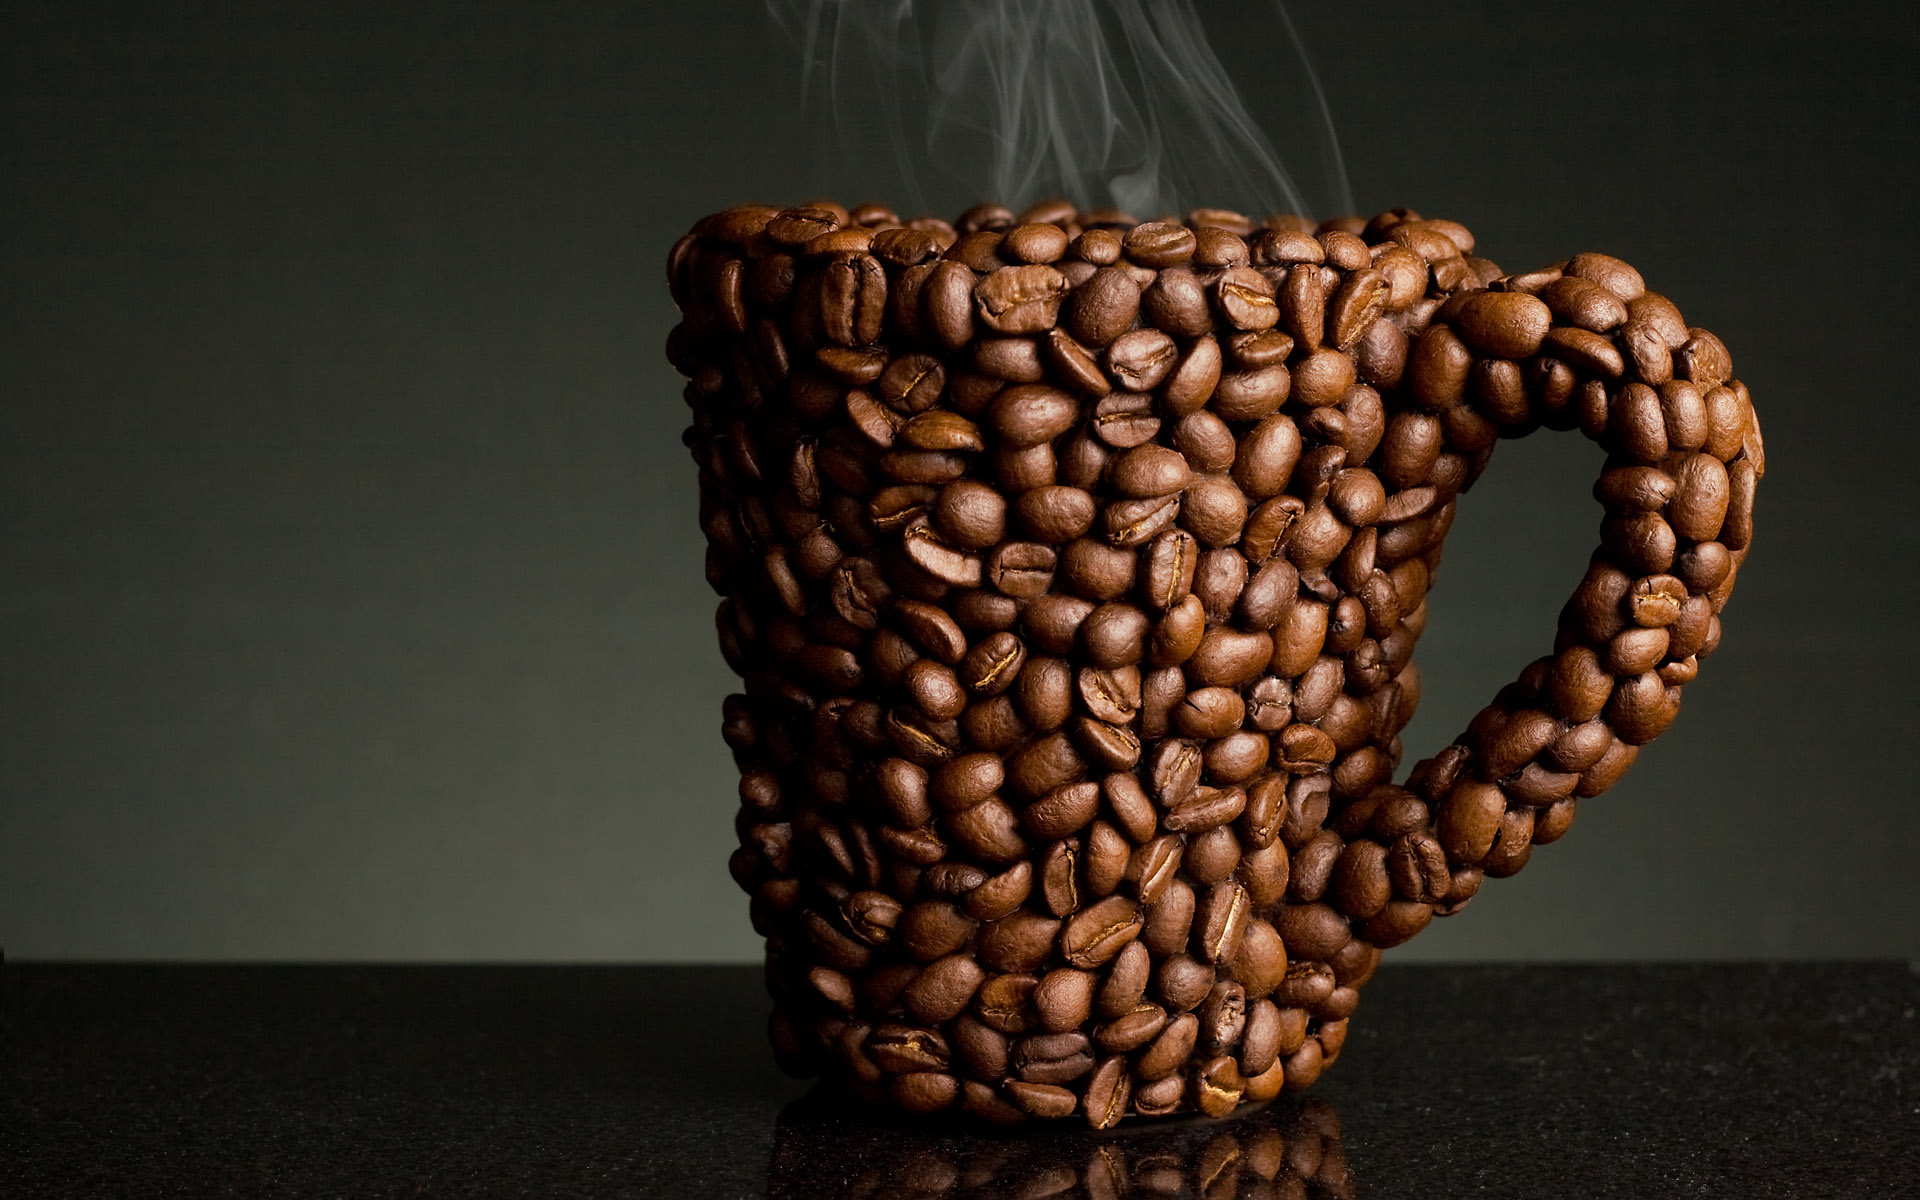 Coffee Hd Wallpapers Free Coffee Cup Hd Wallpapers Coffee Beans